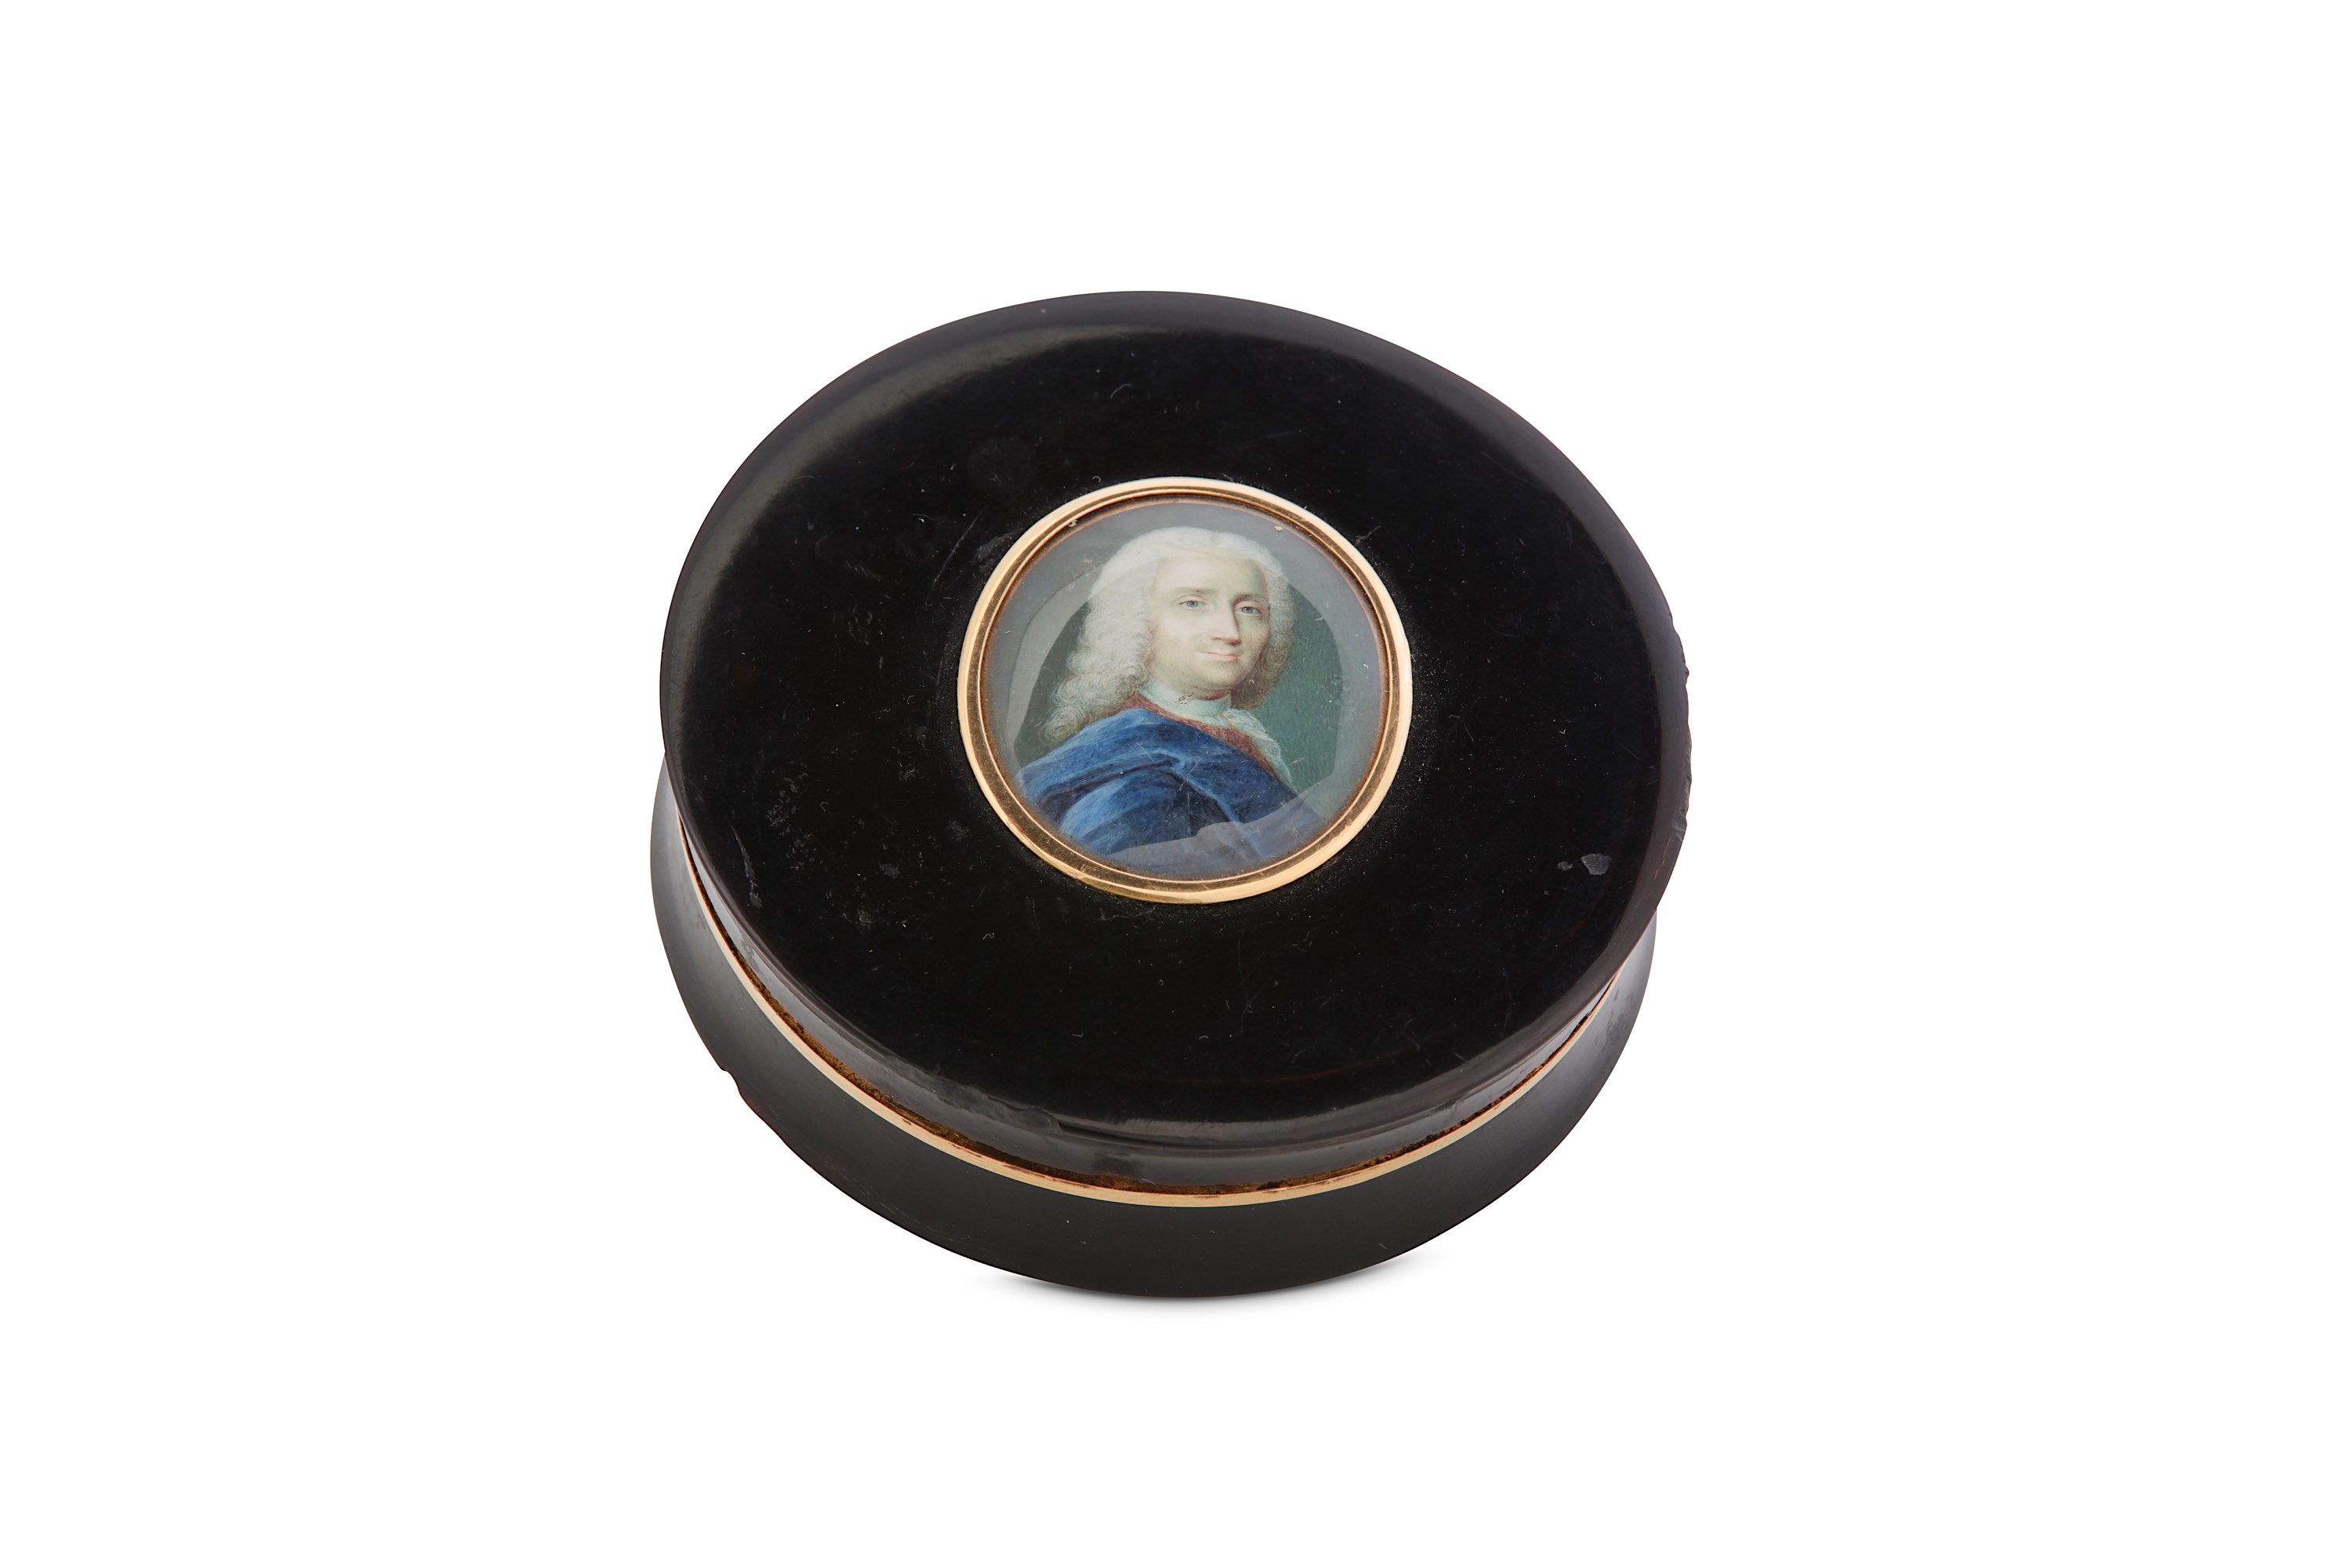 An early 19th century tortoiseshell and gold portrait snuff box, Paris 1819-38 by J L